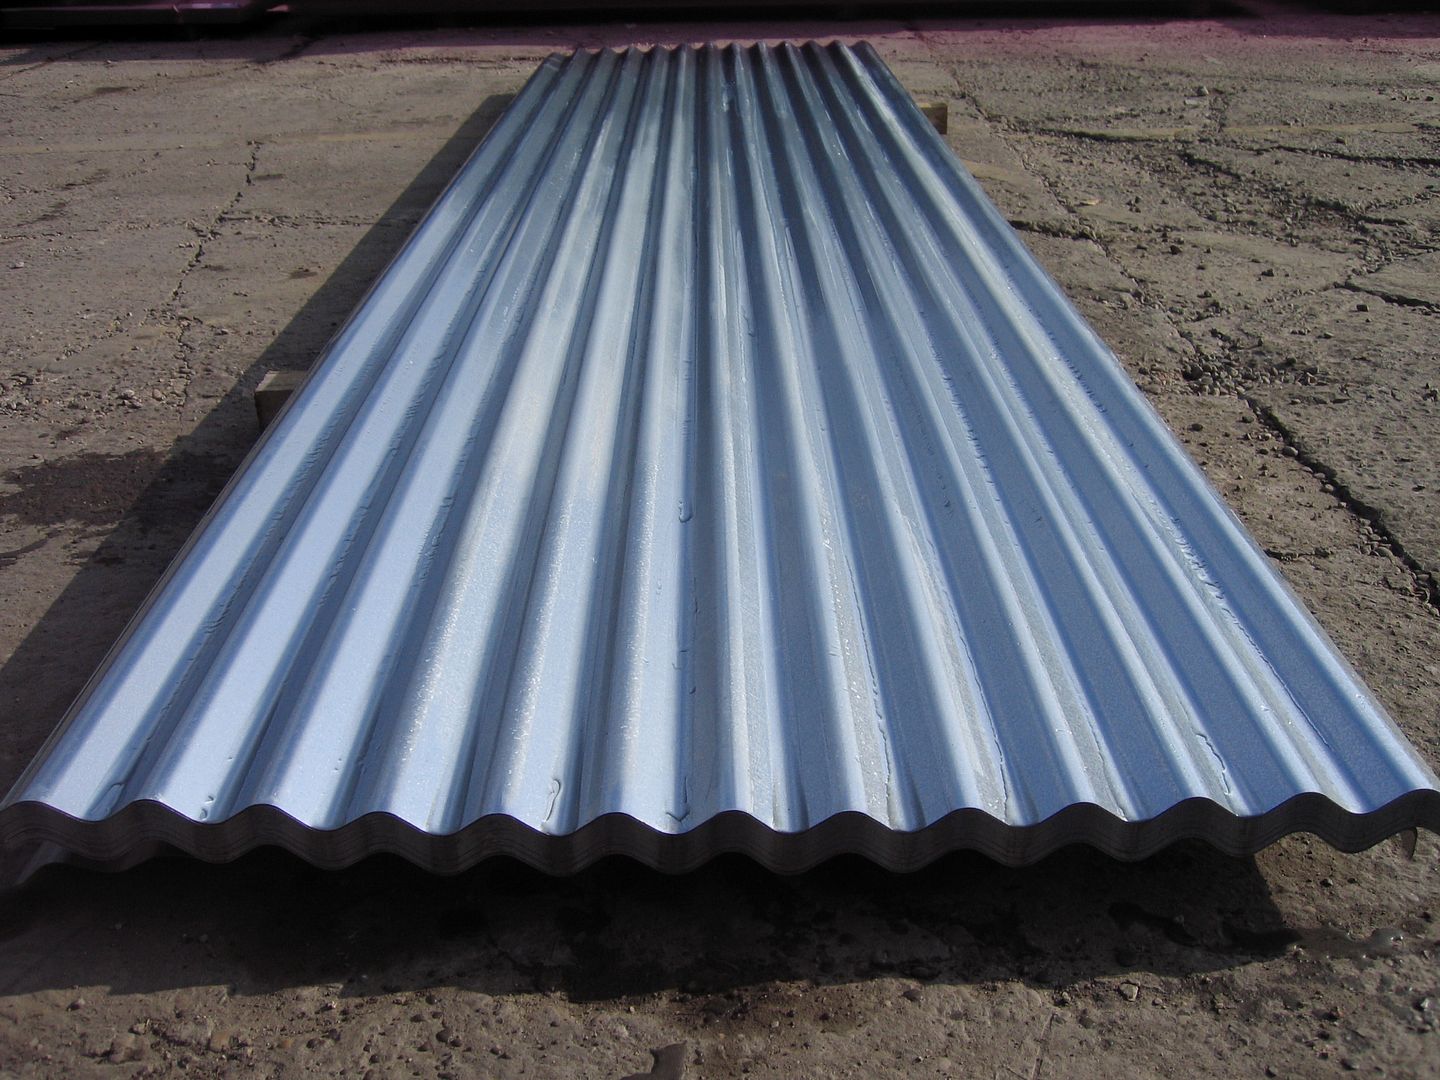 GALVANISED STEEL CORRUGATED ROOFING SHEETS IN SHROPSHIRE eBay